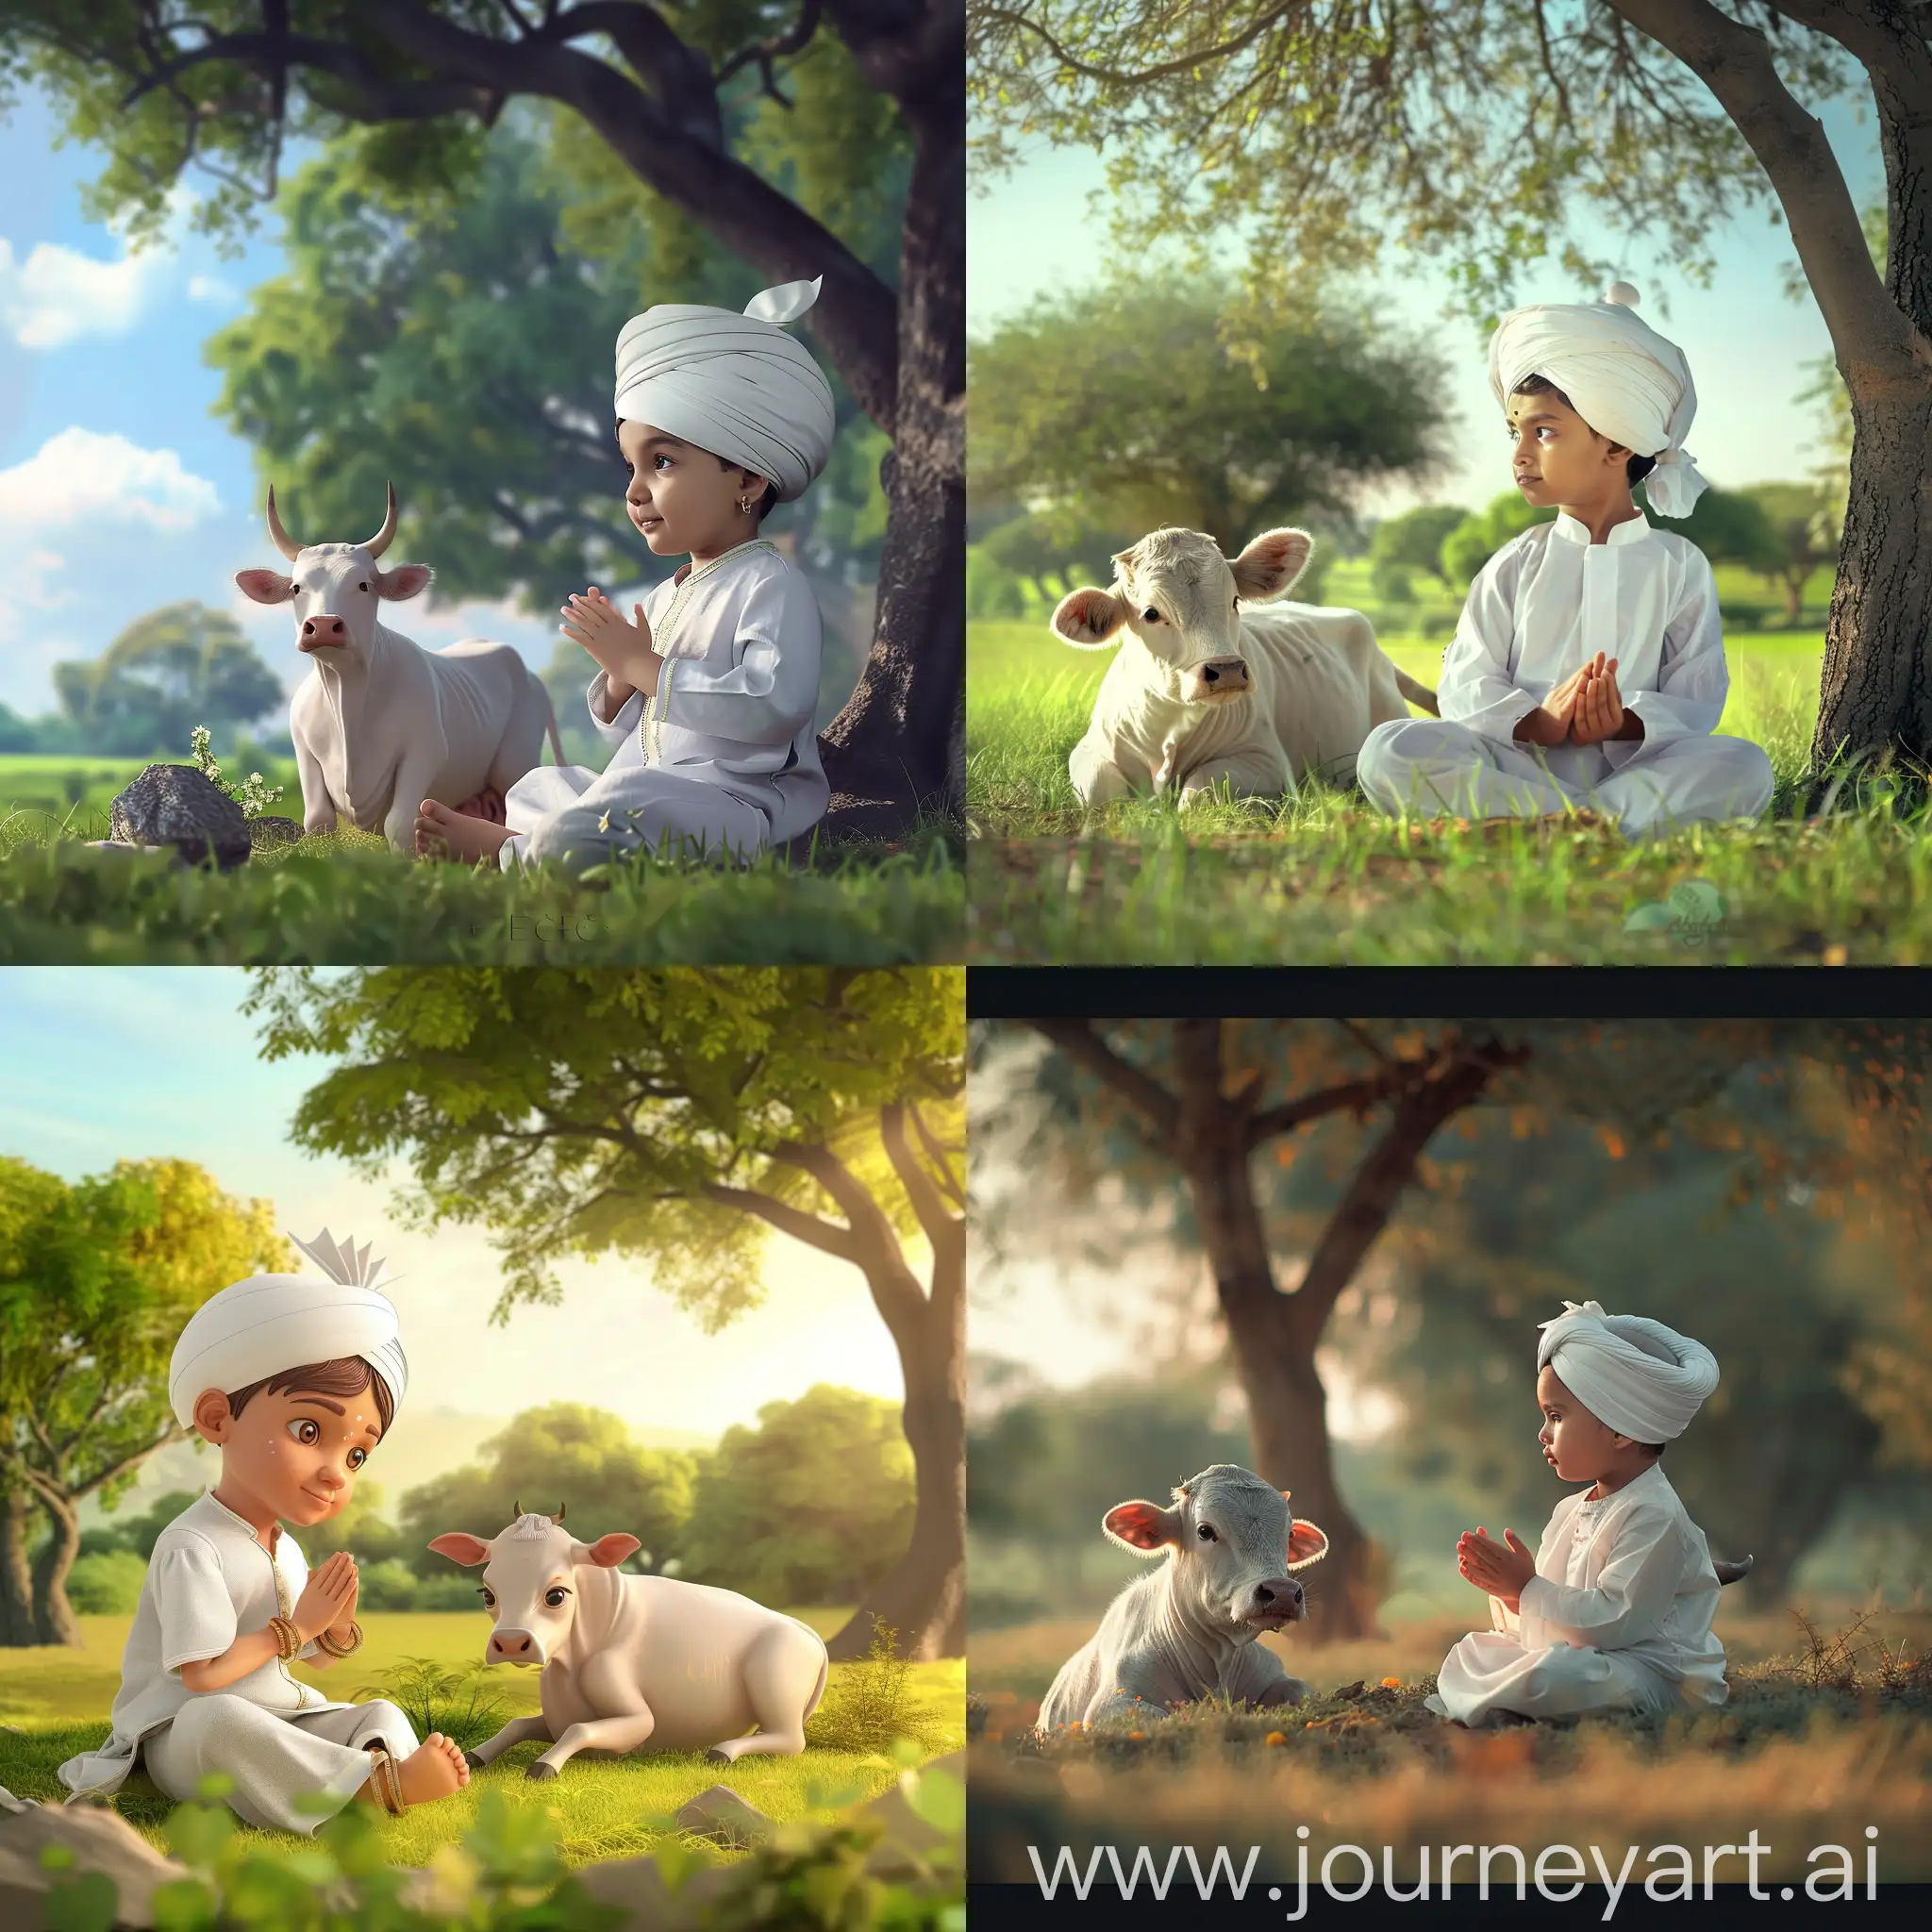 Village-Child-in-Traditional-Attire-Sitting-with-Cow-in-Morning-Field